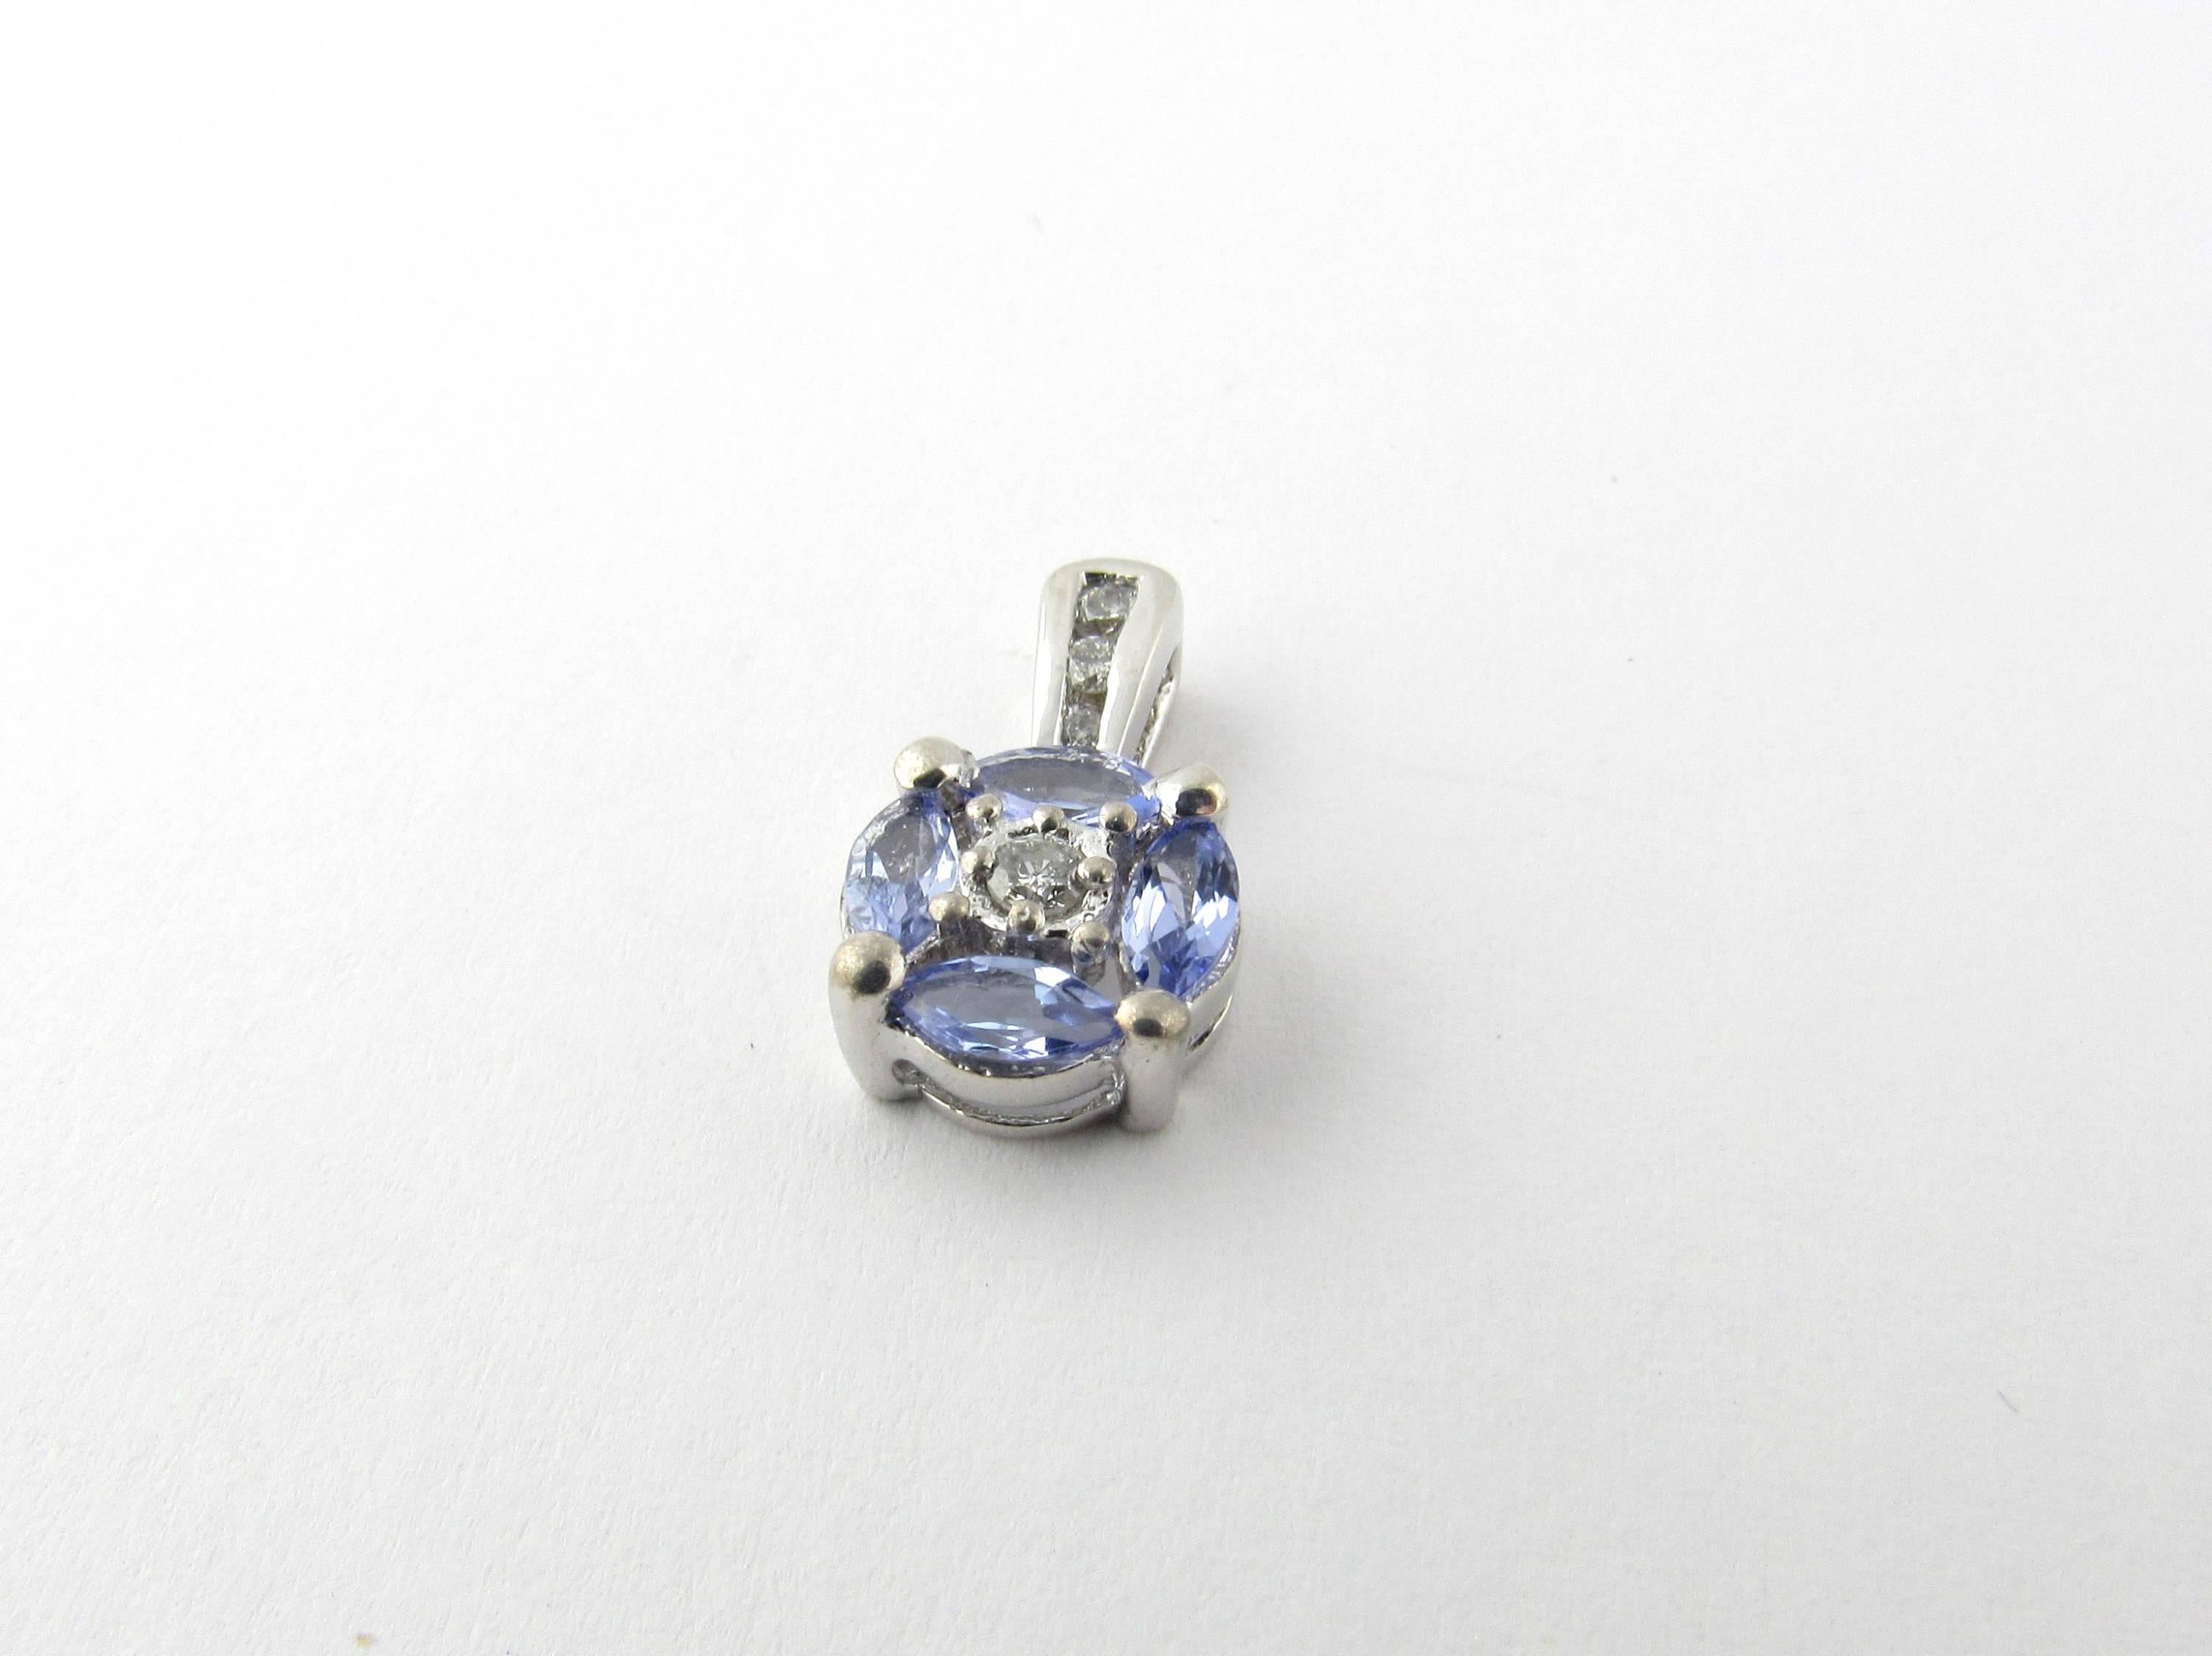 Vintage 14 Karat White Gold Tanzanite and Diamond Pendant- 
This lovely pendant features four marquis tanzanite stones accented with four round brilliant cut diamond set in 14K white gold. 
Approximate total diamond weight: .07 ct. 
Diamond color: I